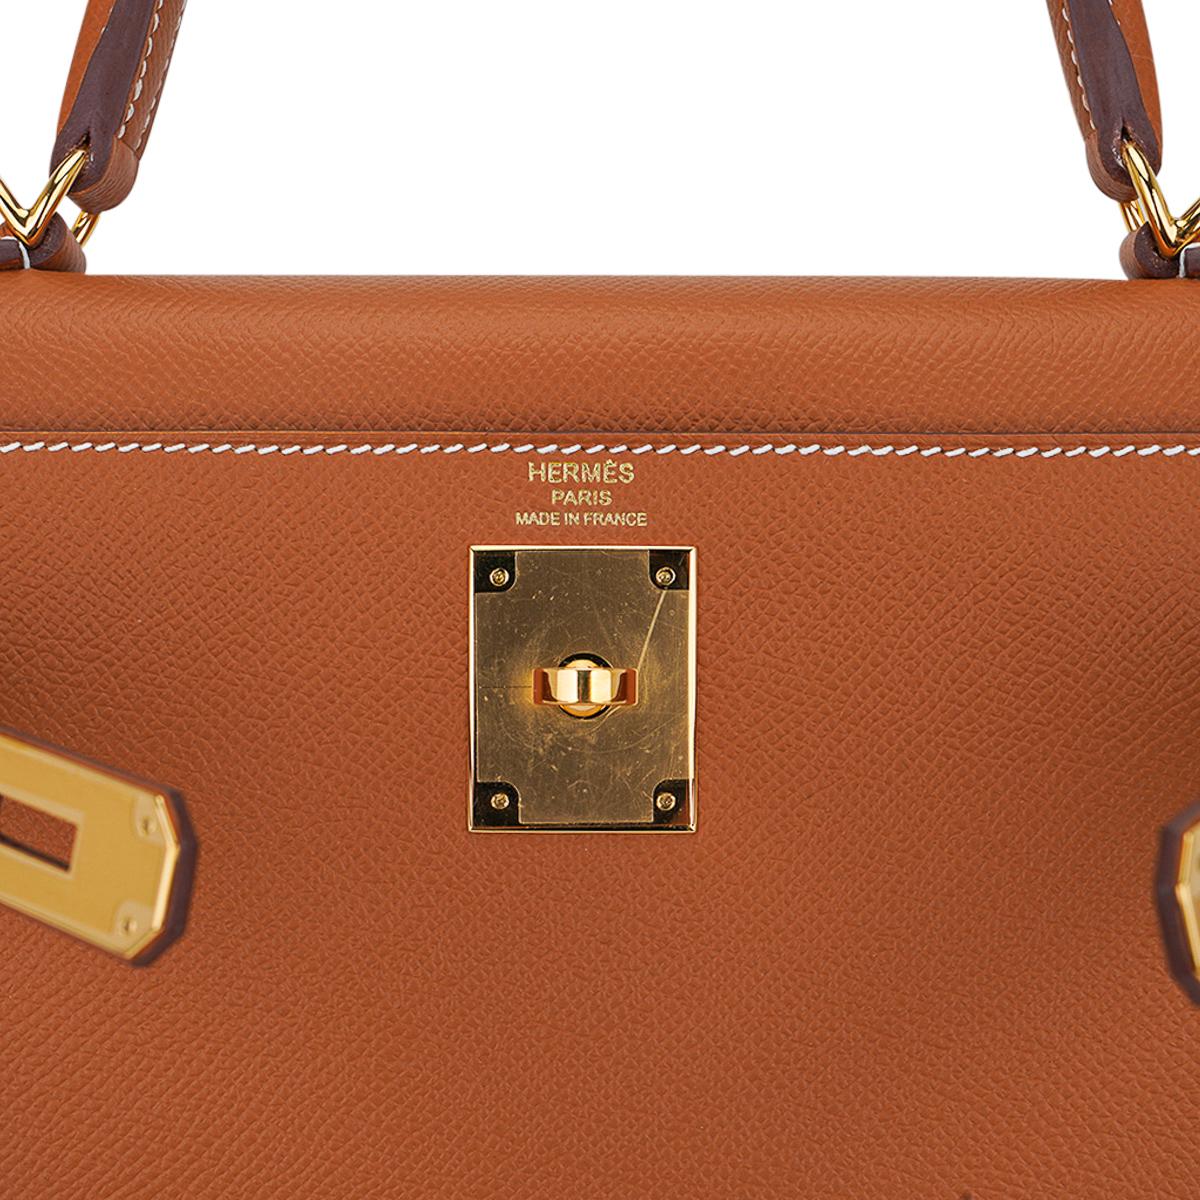 Hermes Kelly 28 Sellier Bag Gold Hardware Epsom Leather In New Condition For Sale In Miami, FL